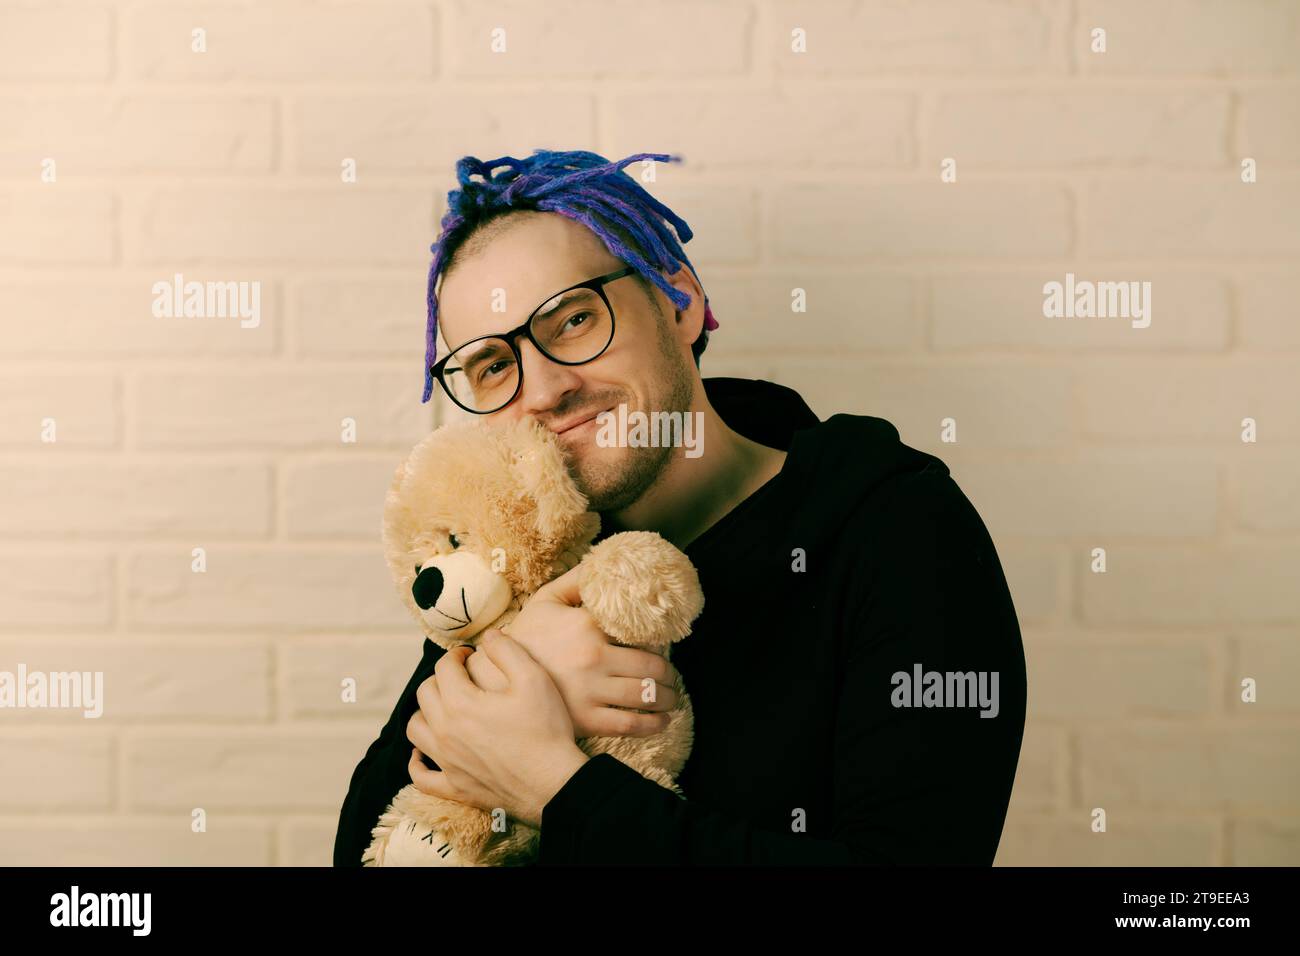 The Tender Embrace: A Man with Dreadlocks with Glasses Cherishing a Plush Toy. Stock Photo